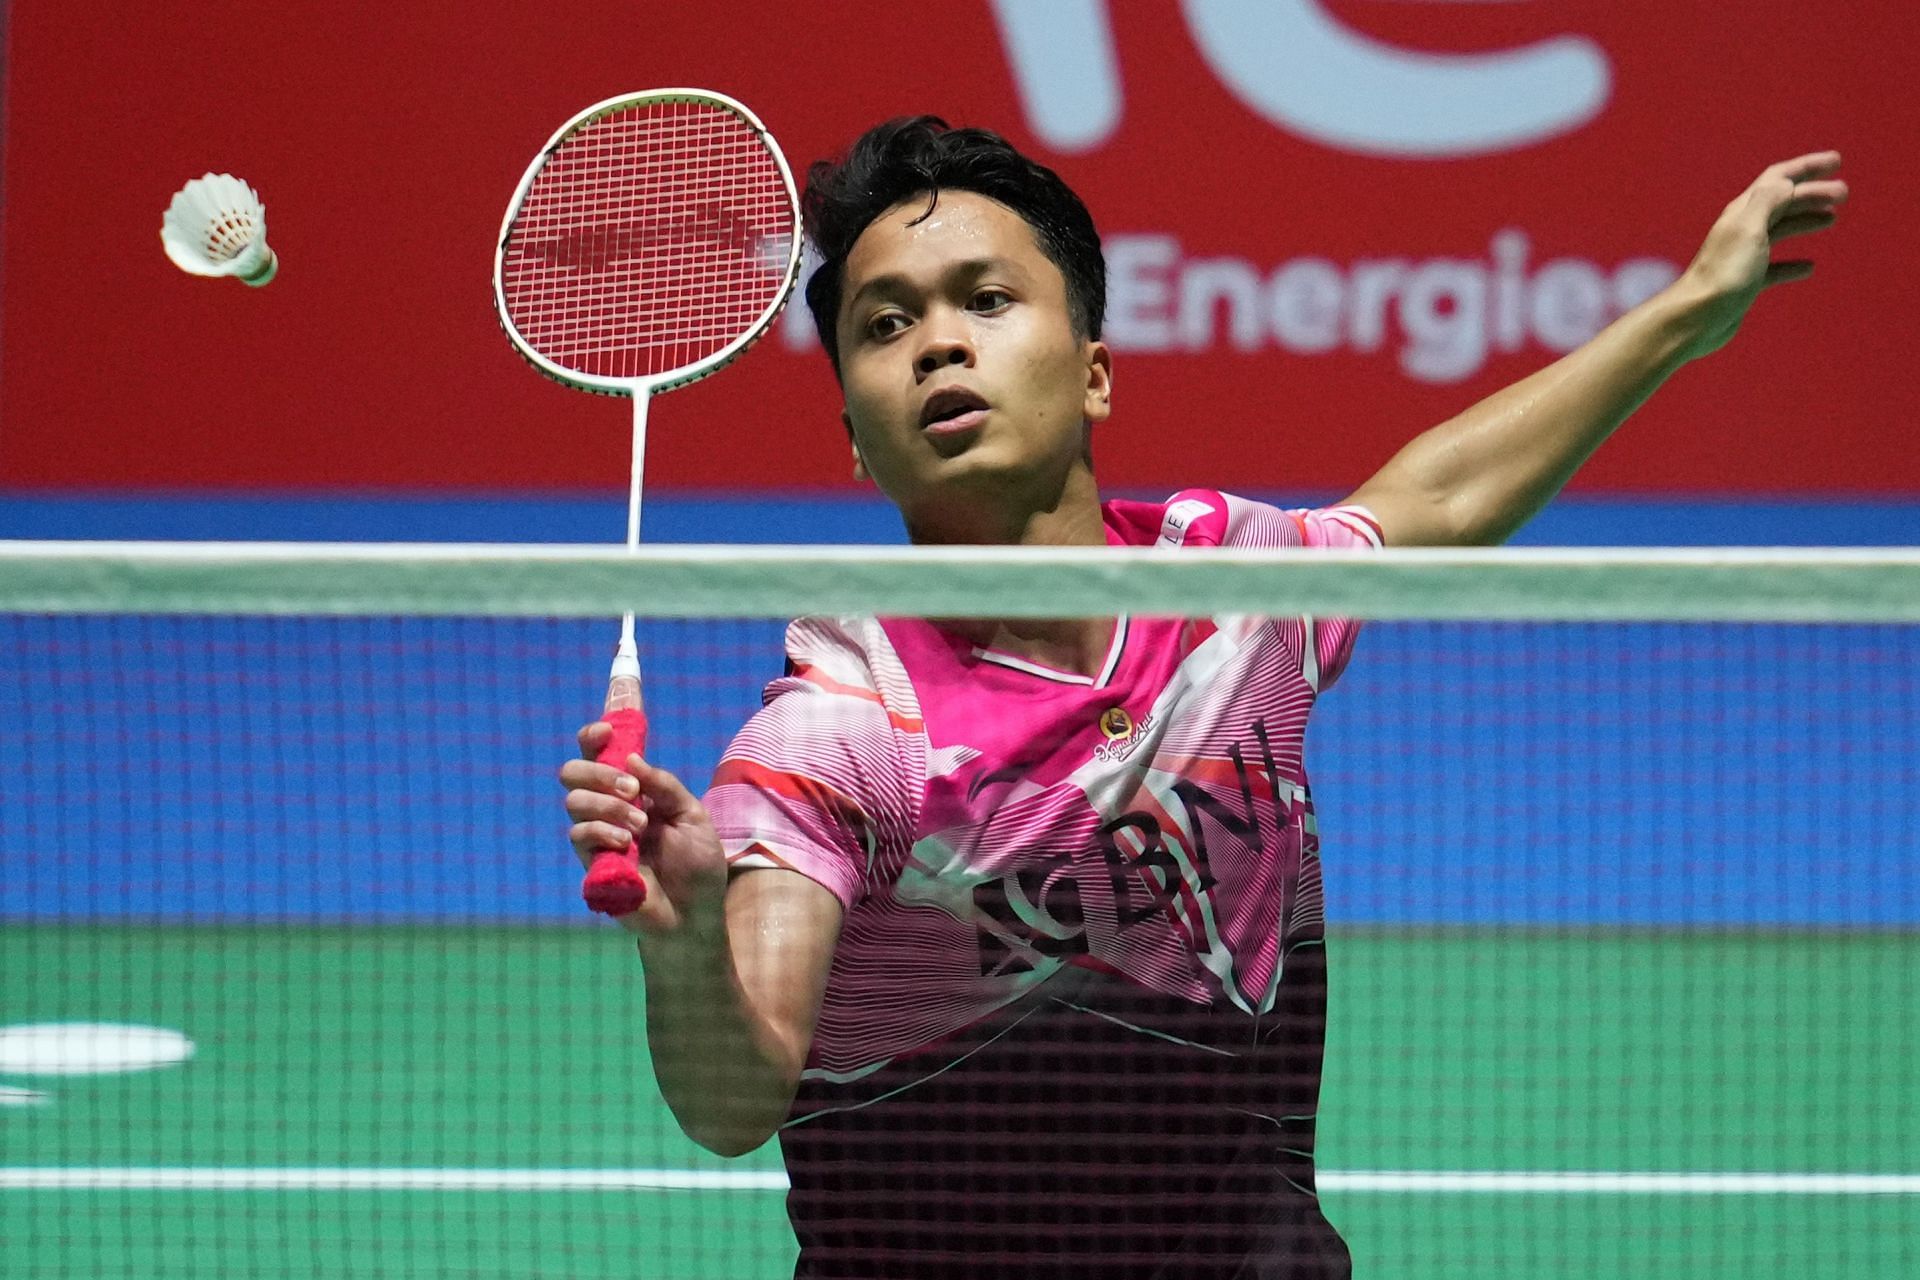 All England Open 2023 HS Prannoy vs Anthony Sinisuka Ginting preview, head-to-head, prediction, where to watch and live streaming details